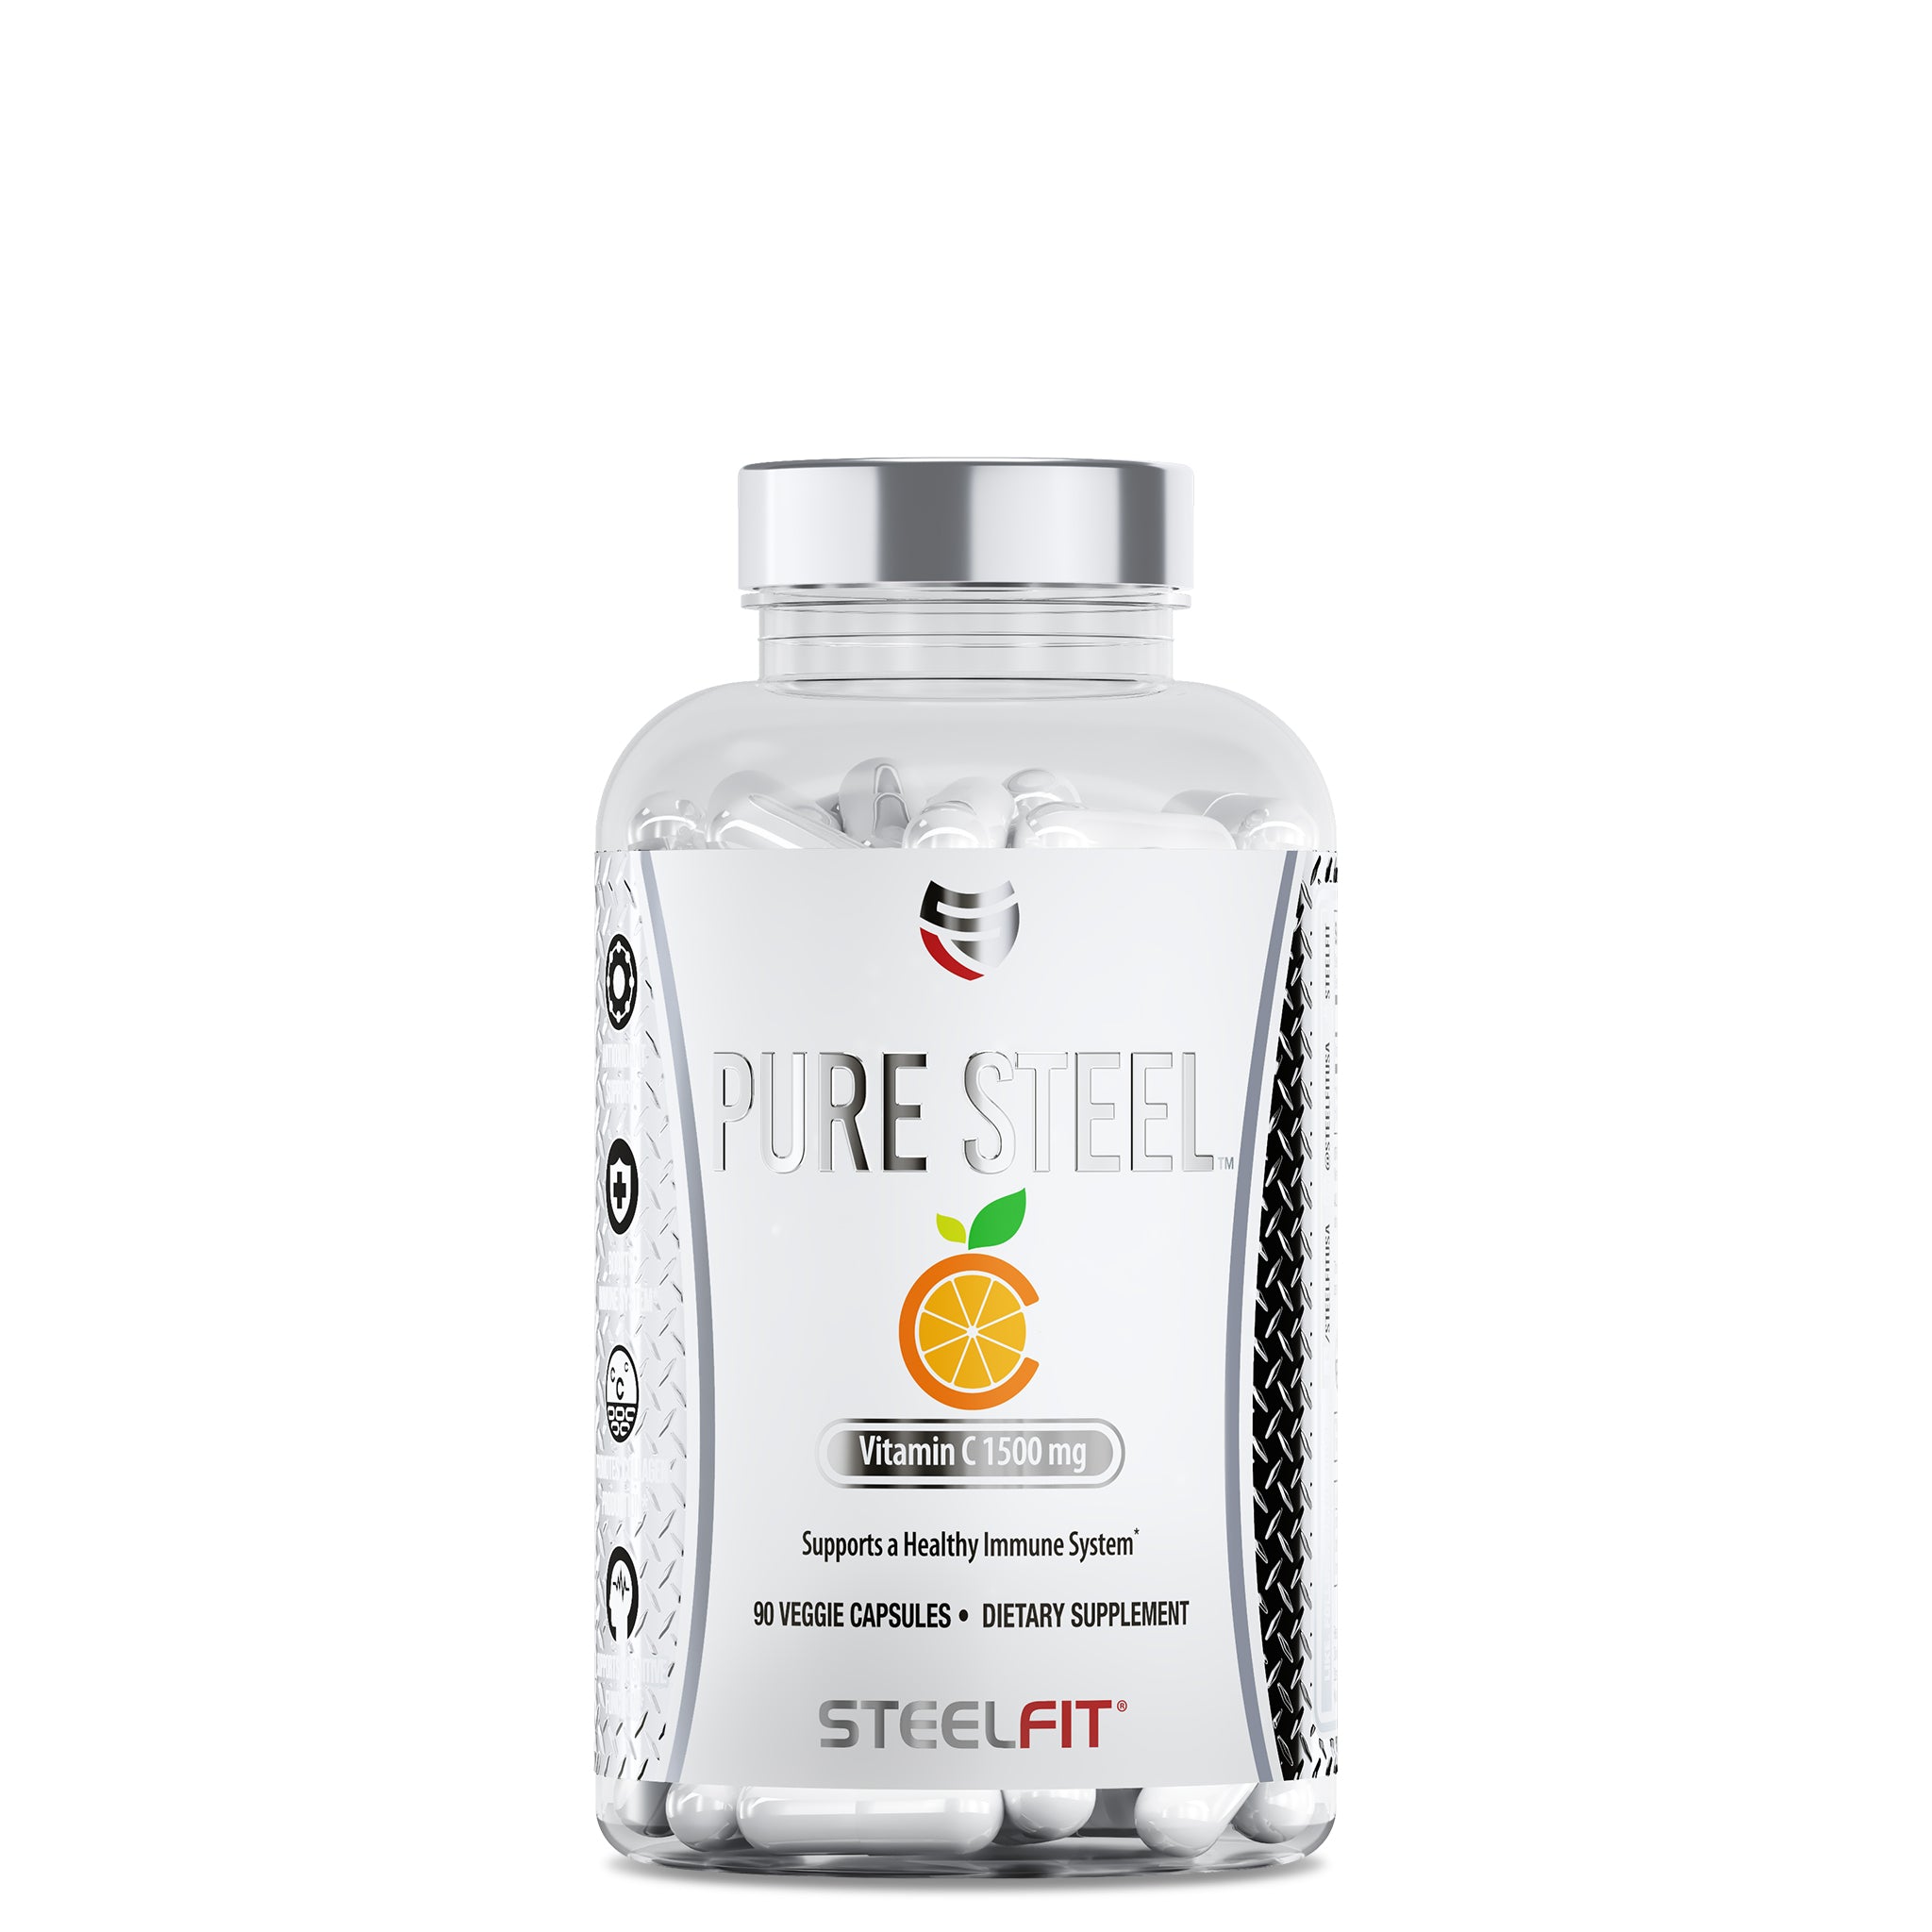 pure steel vitamin c vegan for healthy immune system and antioxidant support